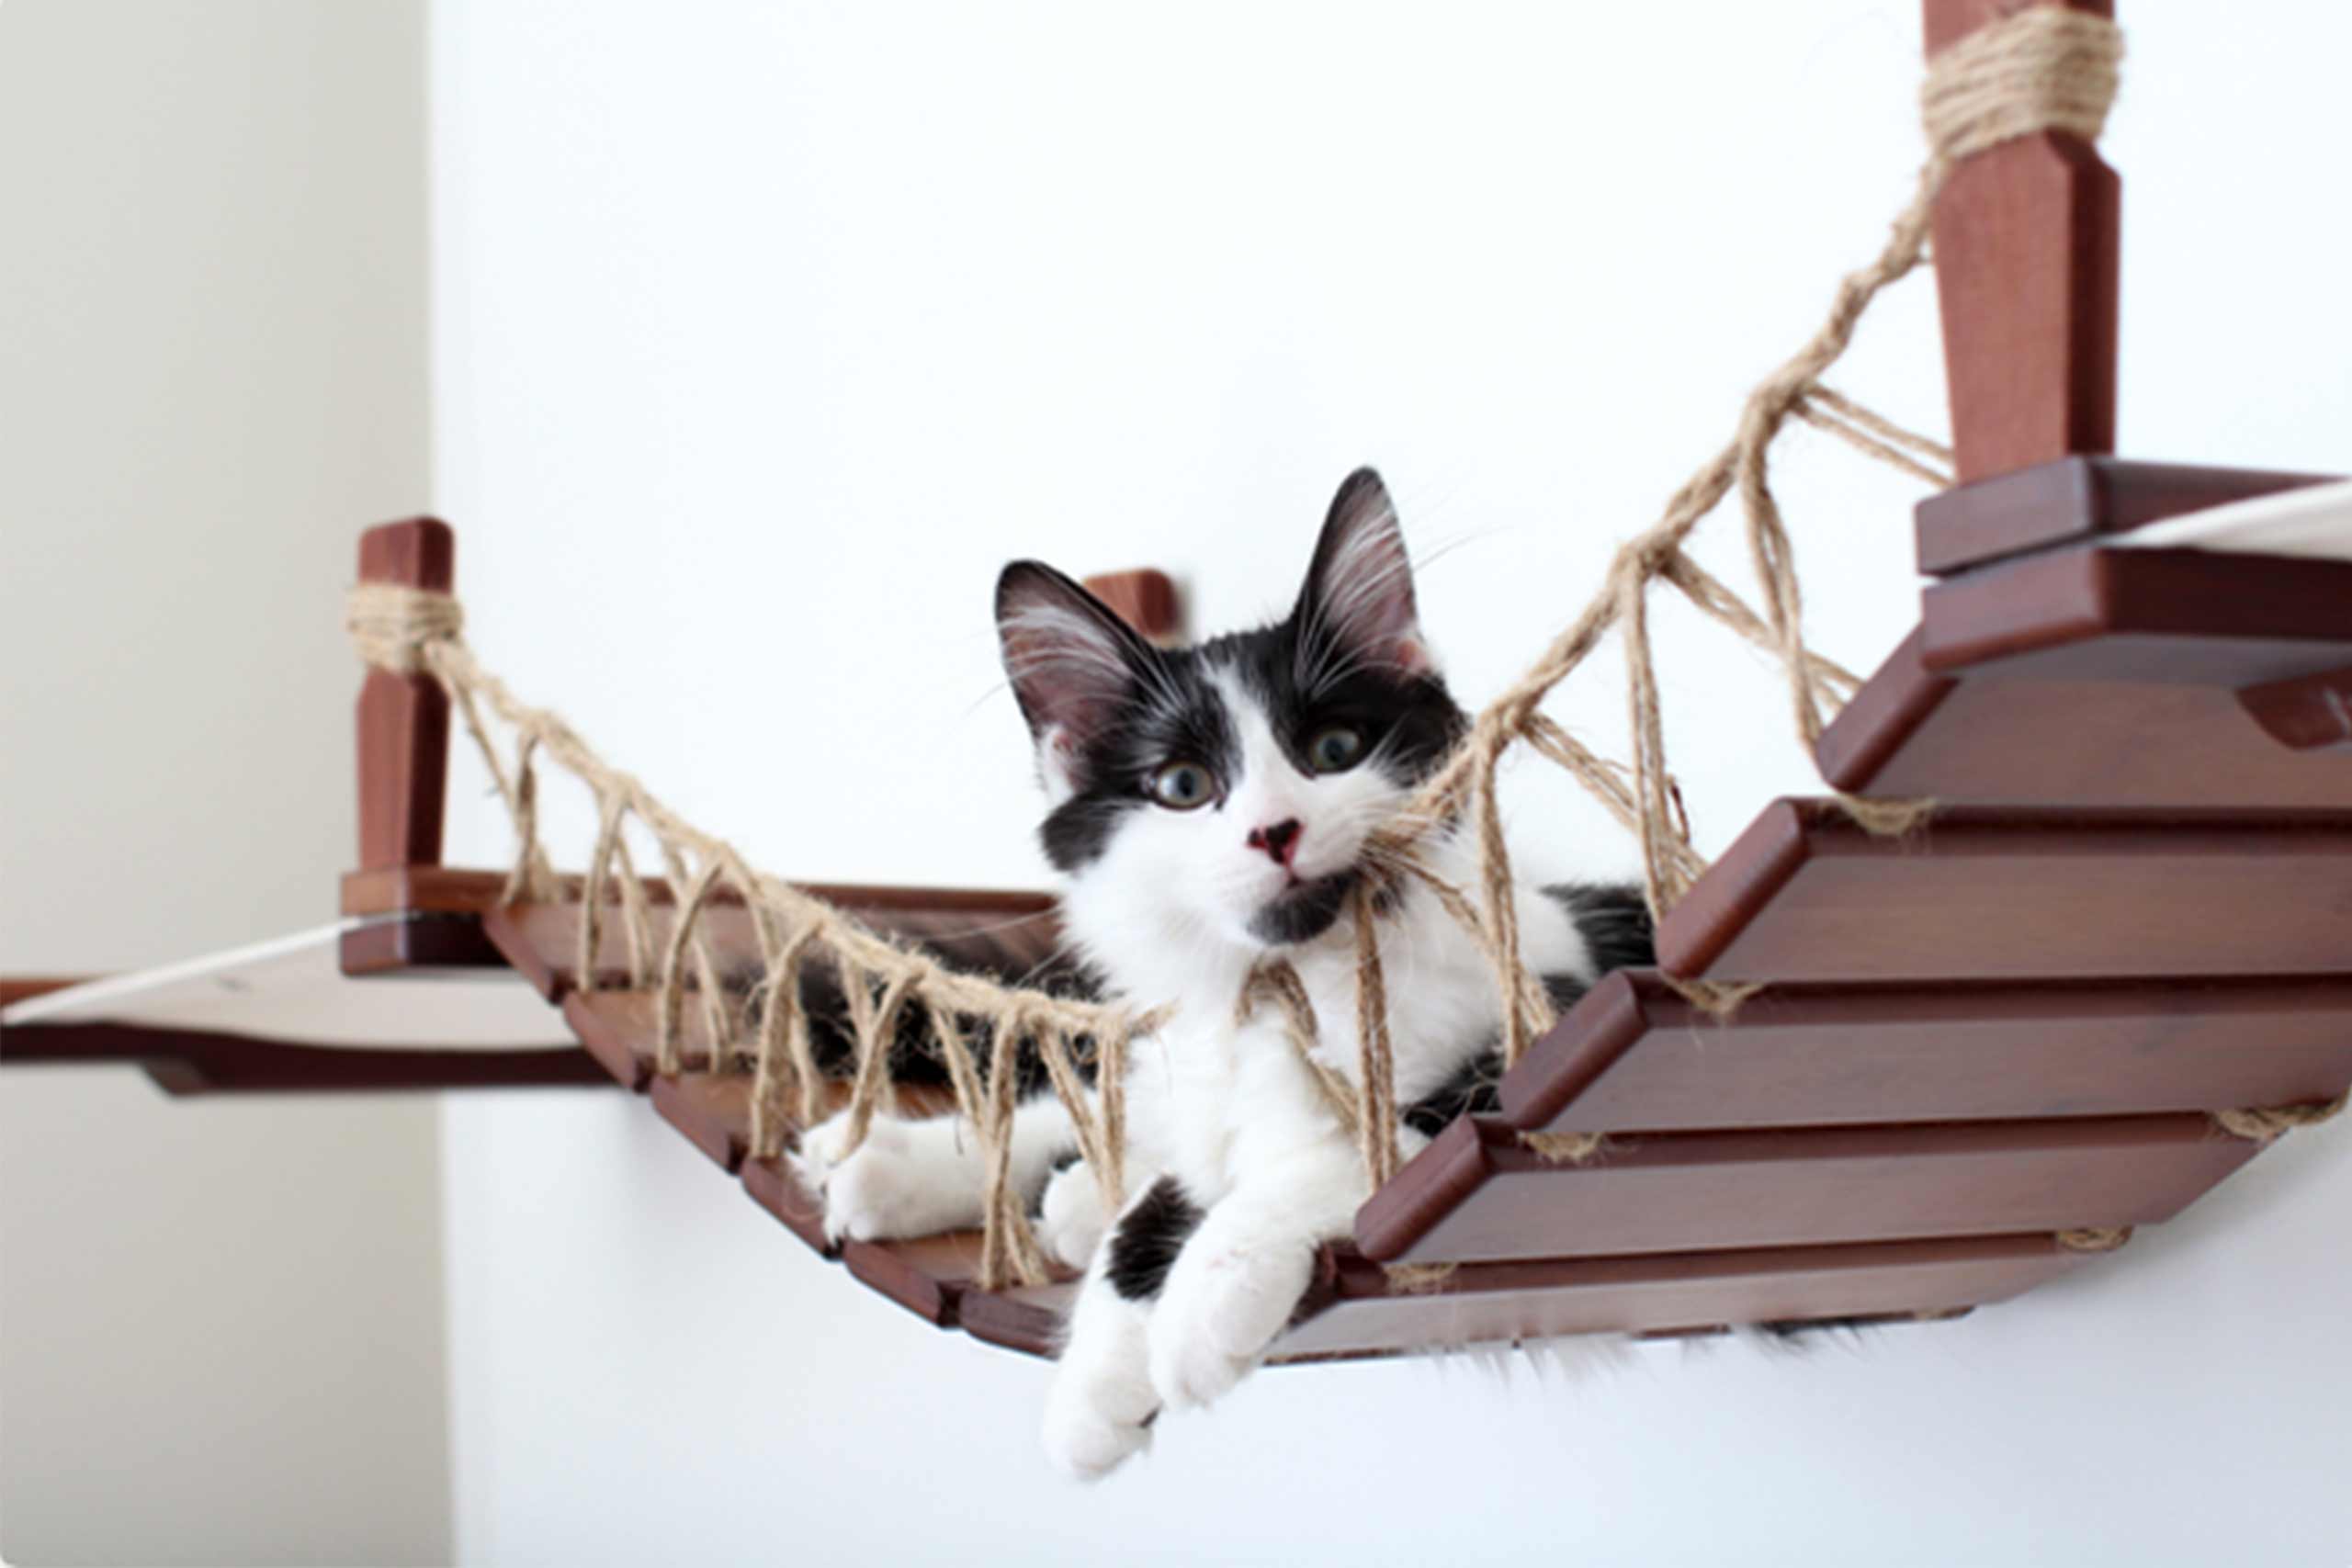 Black and white kitten relaxing in the middle of a cat bridge with hammocks attached